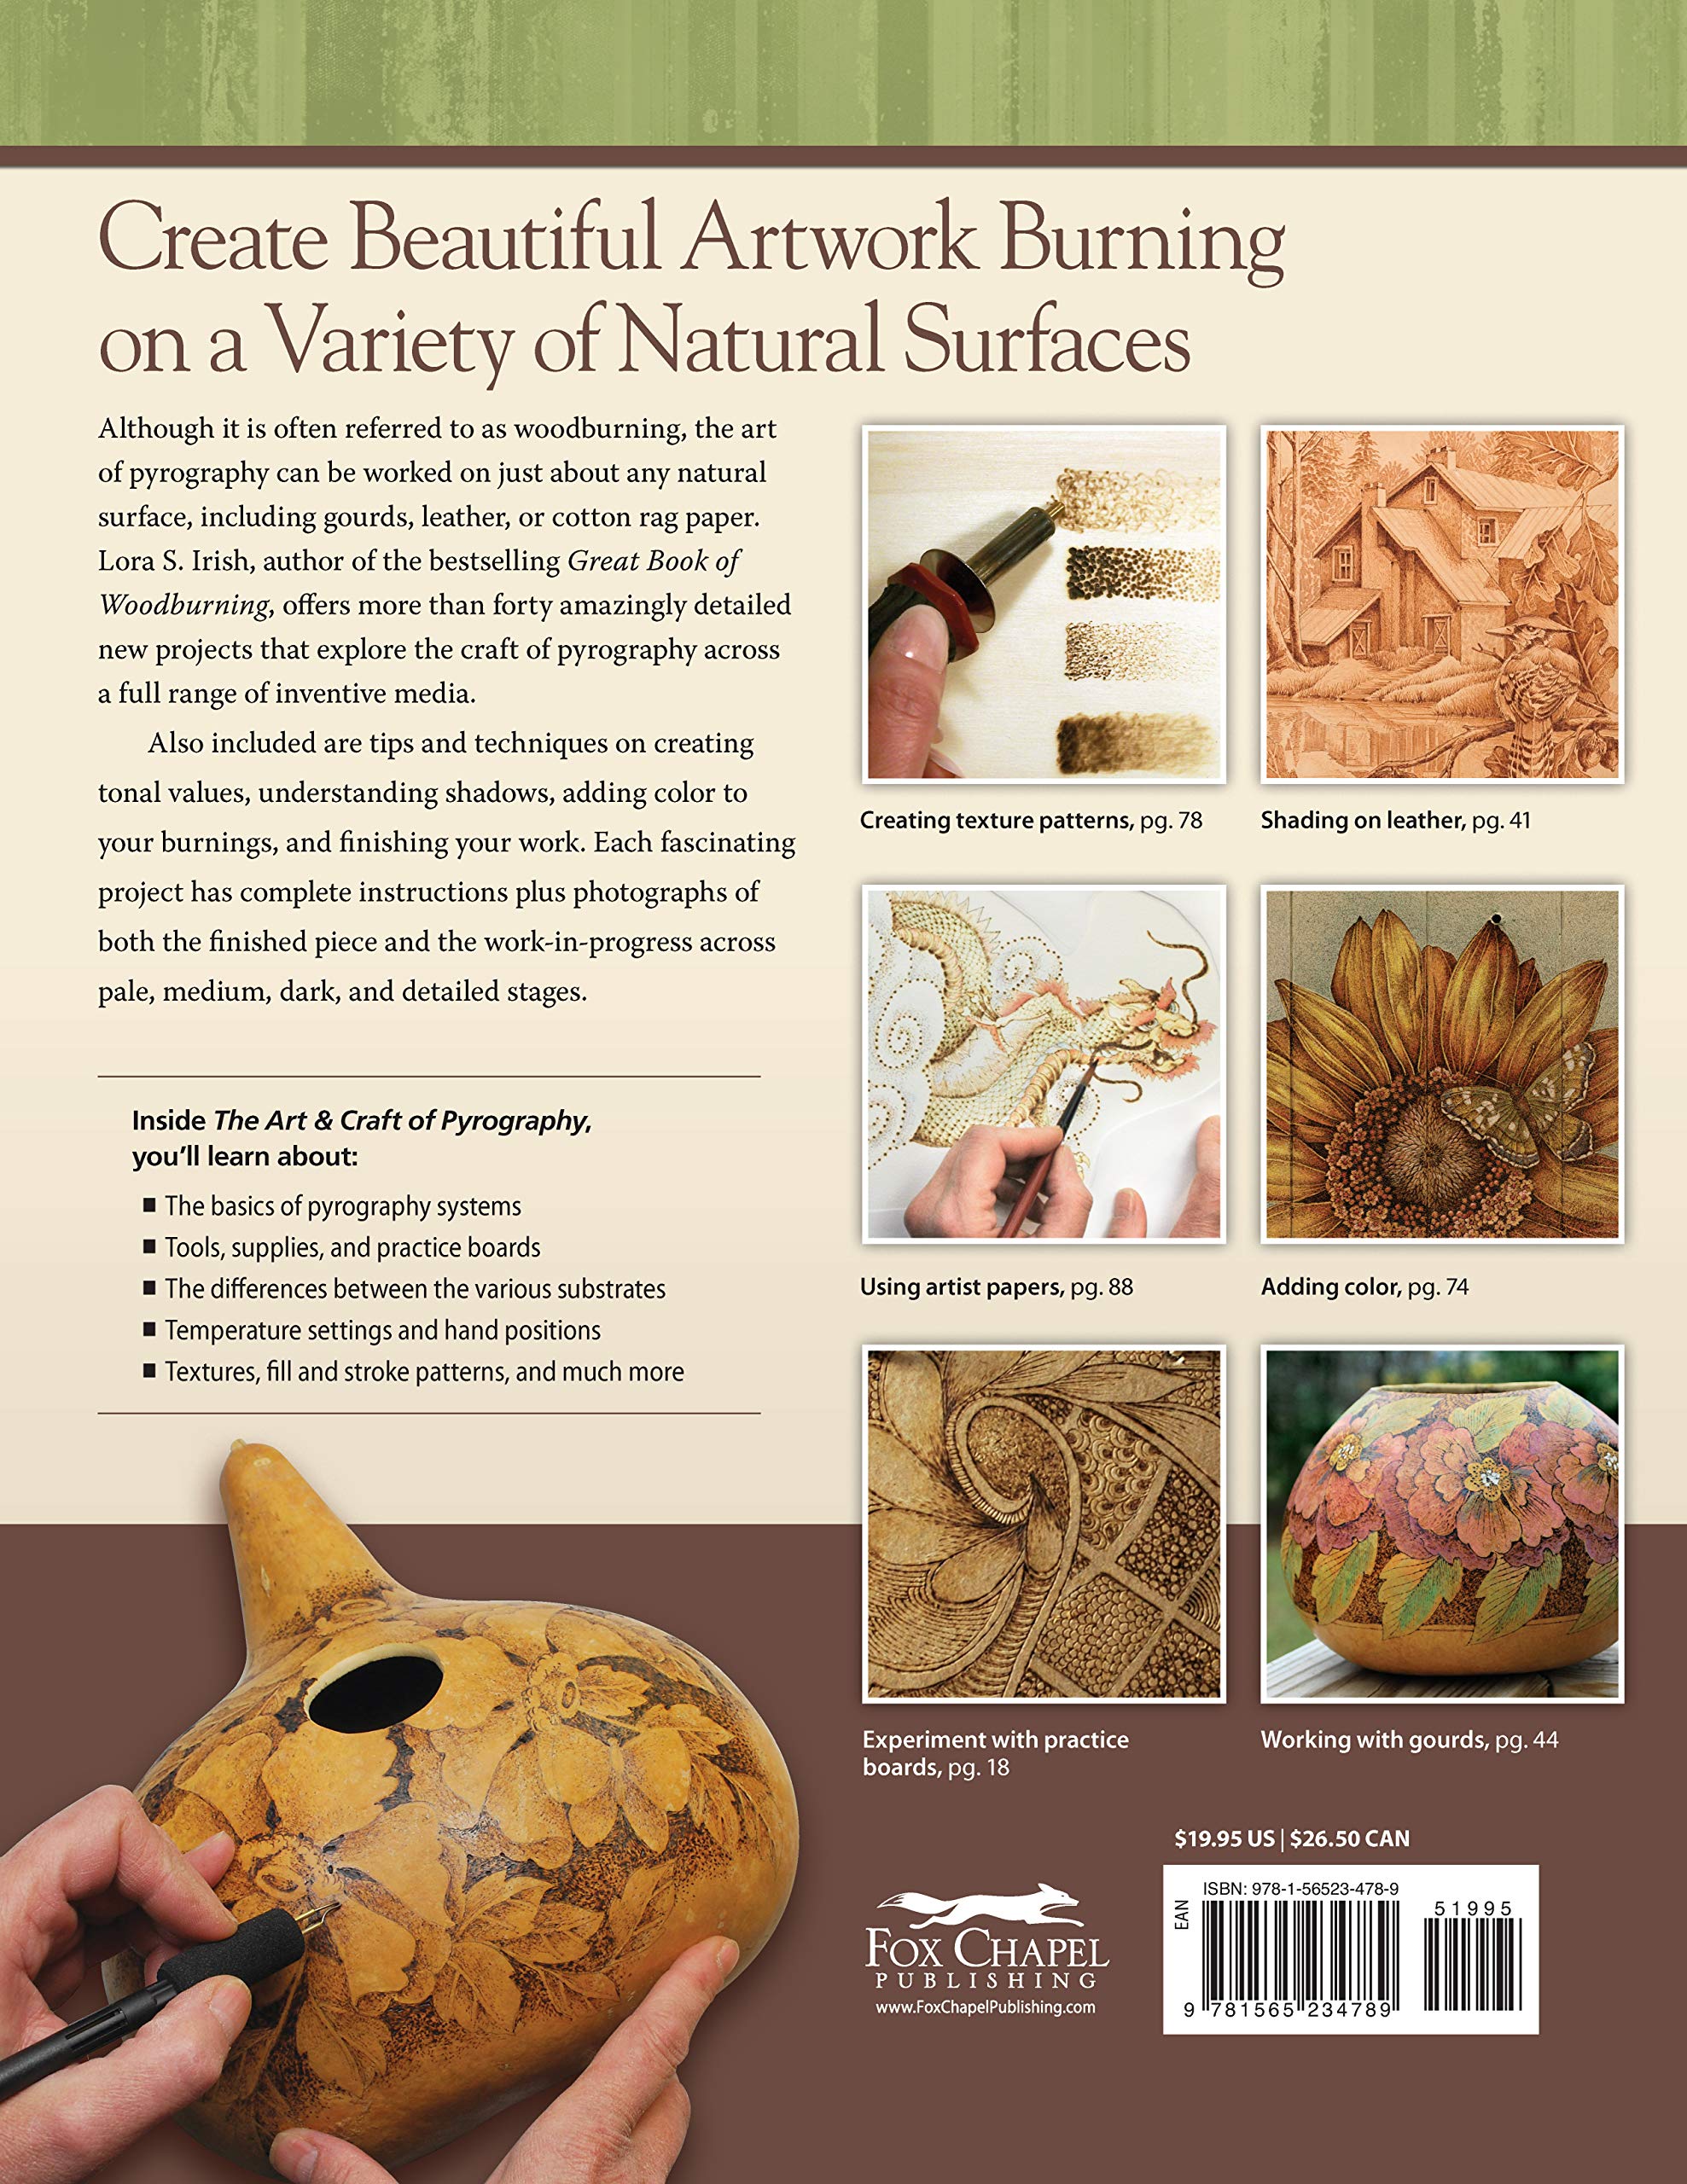 The Art & Craft of Pyrography: Drawing with Fire on Leather, Gourds, Cloth, Paper, and Wood (Fox Chapel Publishing) More Than 40 Patterns, Step-by-Step Projects, and Expert Advice from Lora S. Irish